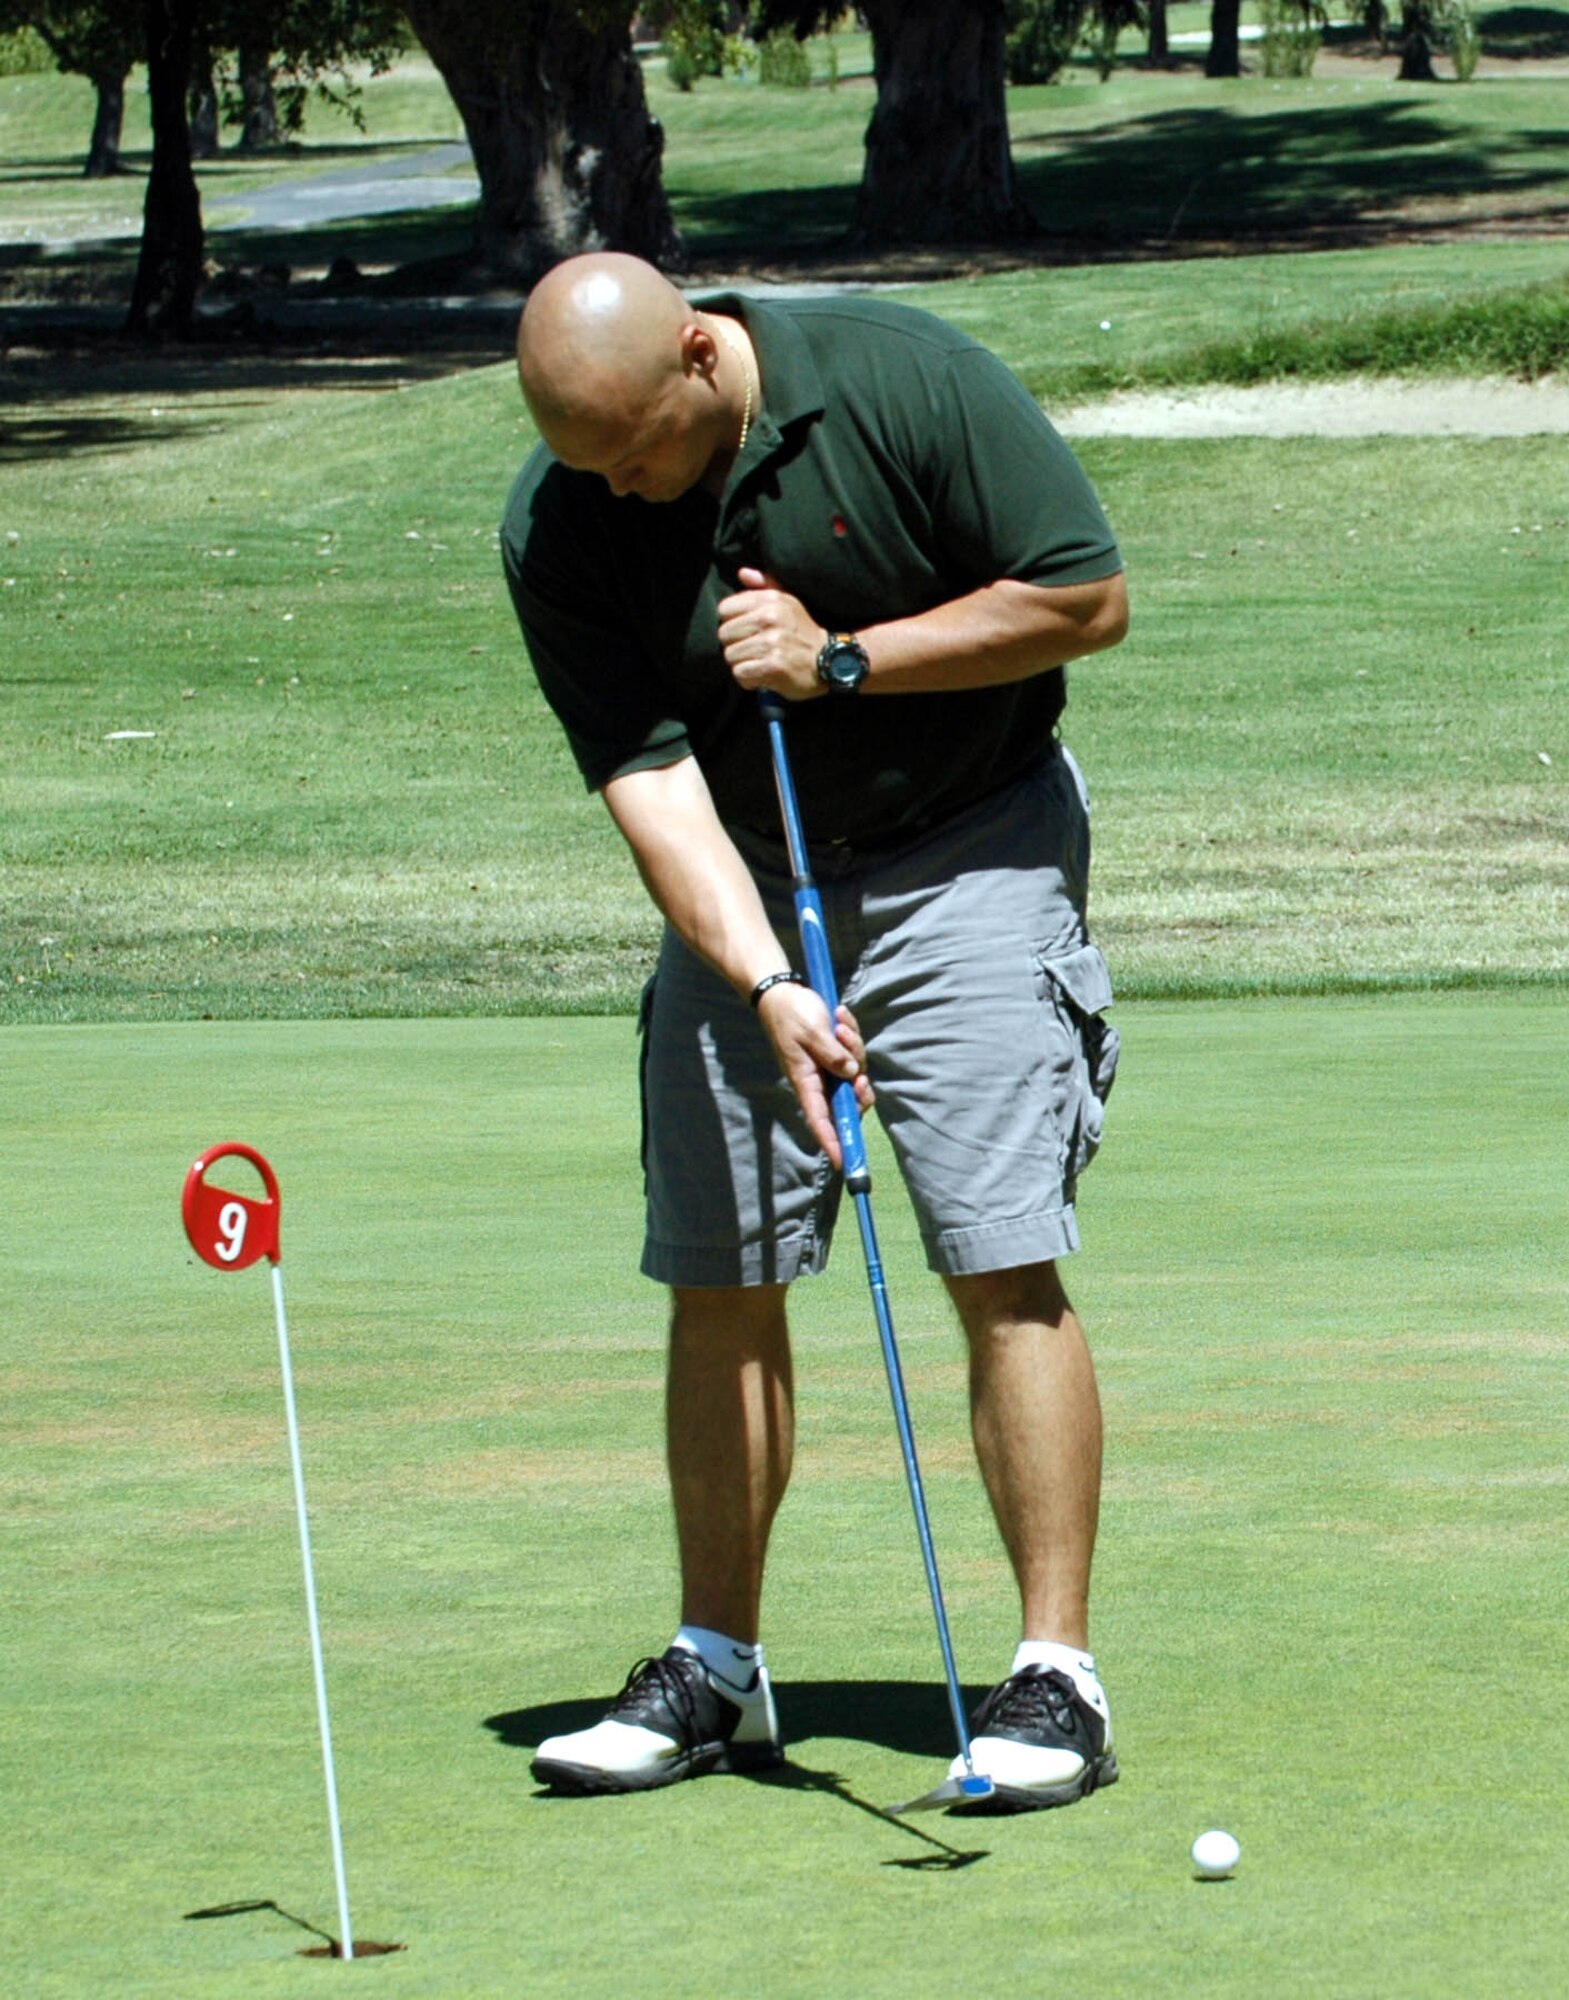 Michael Shirley takes a few practice putts before the 60th Air Force Anniversary Golf Tournament at the Cypress Lakes Golf Course Aug. 17. Proceeds from the tournament will be used for the 60th Air Force Anniversary Ball, Sept. 14. (U.S. Air Force photo/Staff Sgt. Candy Knight)